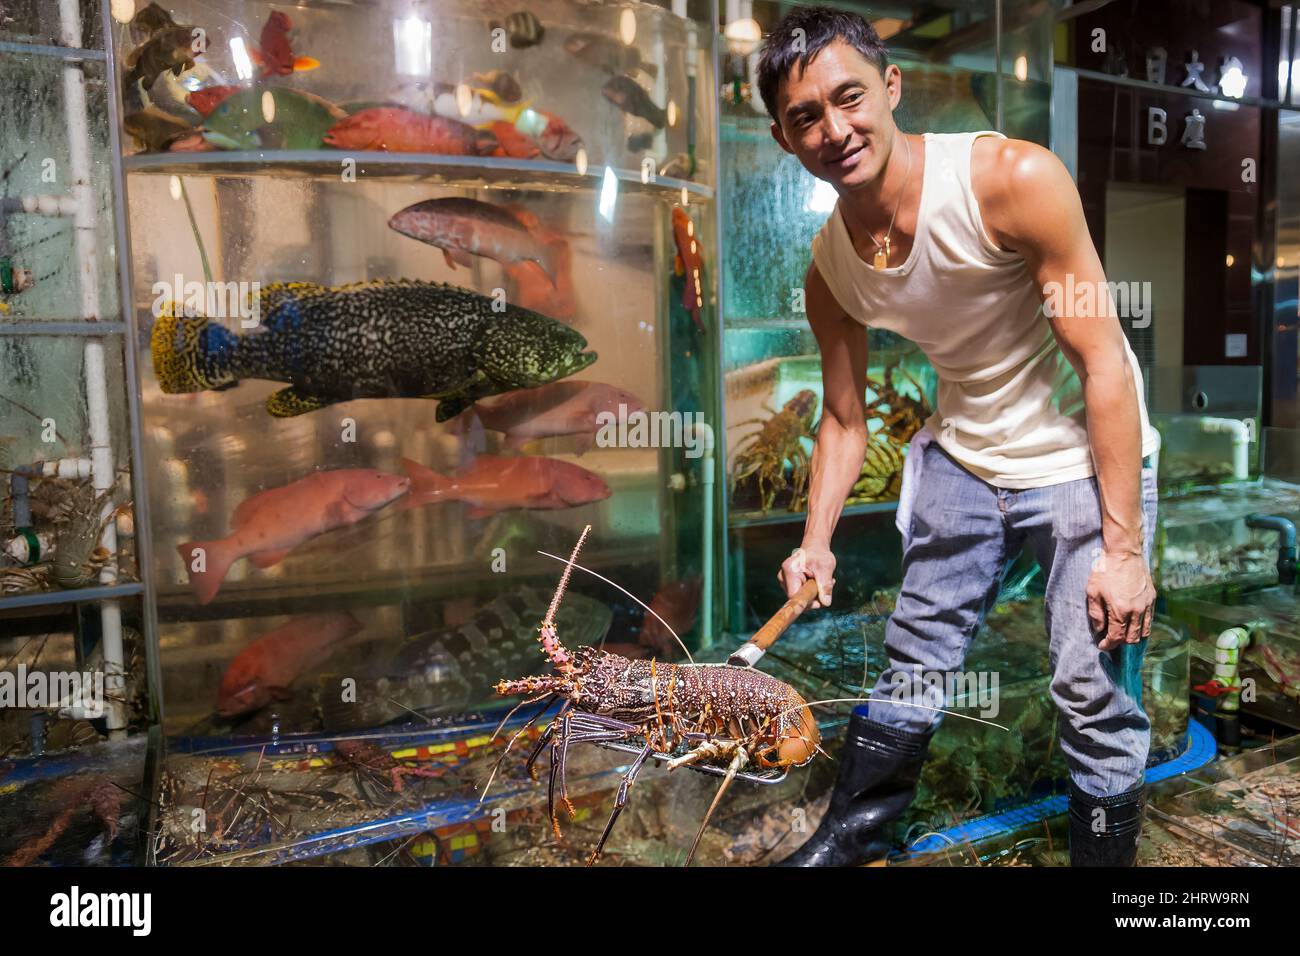 A staff member with a lobster selected by a customer from live fish and seafood on display in tanks outside a restaurant at Sai Kung waterfront, Hong Stock Photo